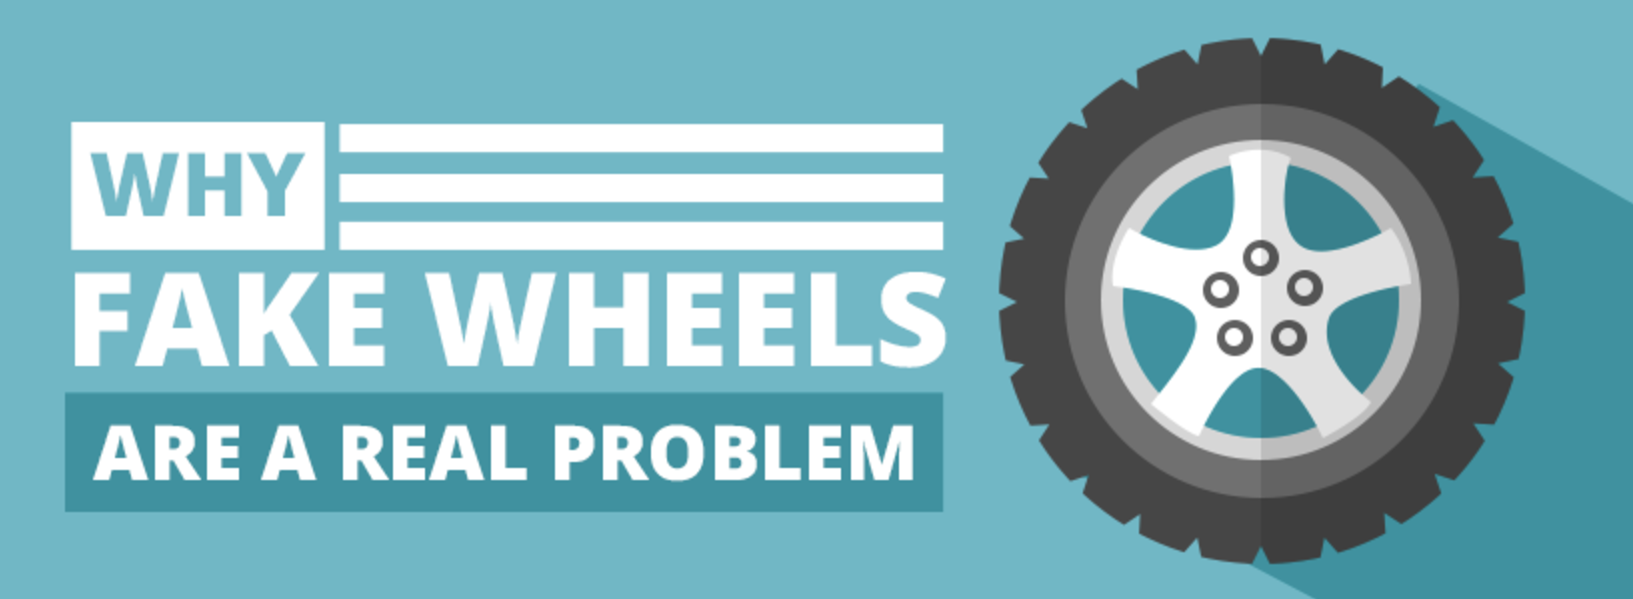 Why Fake Wheels Are a Real Problem [Infographic]